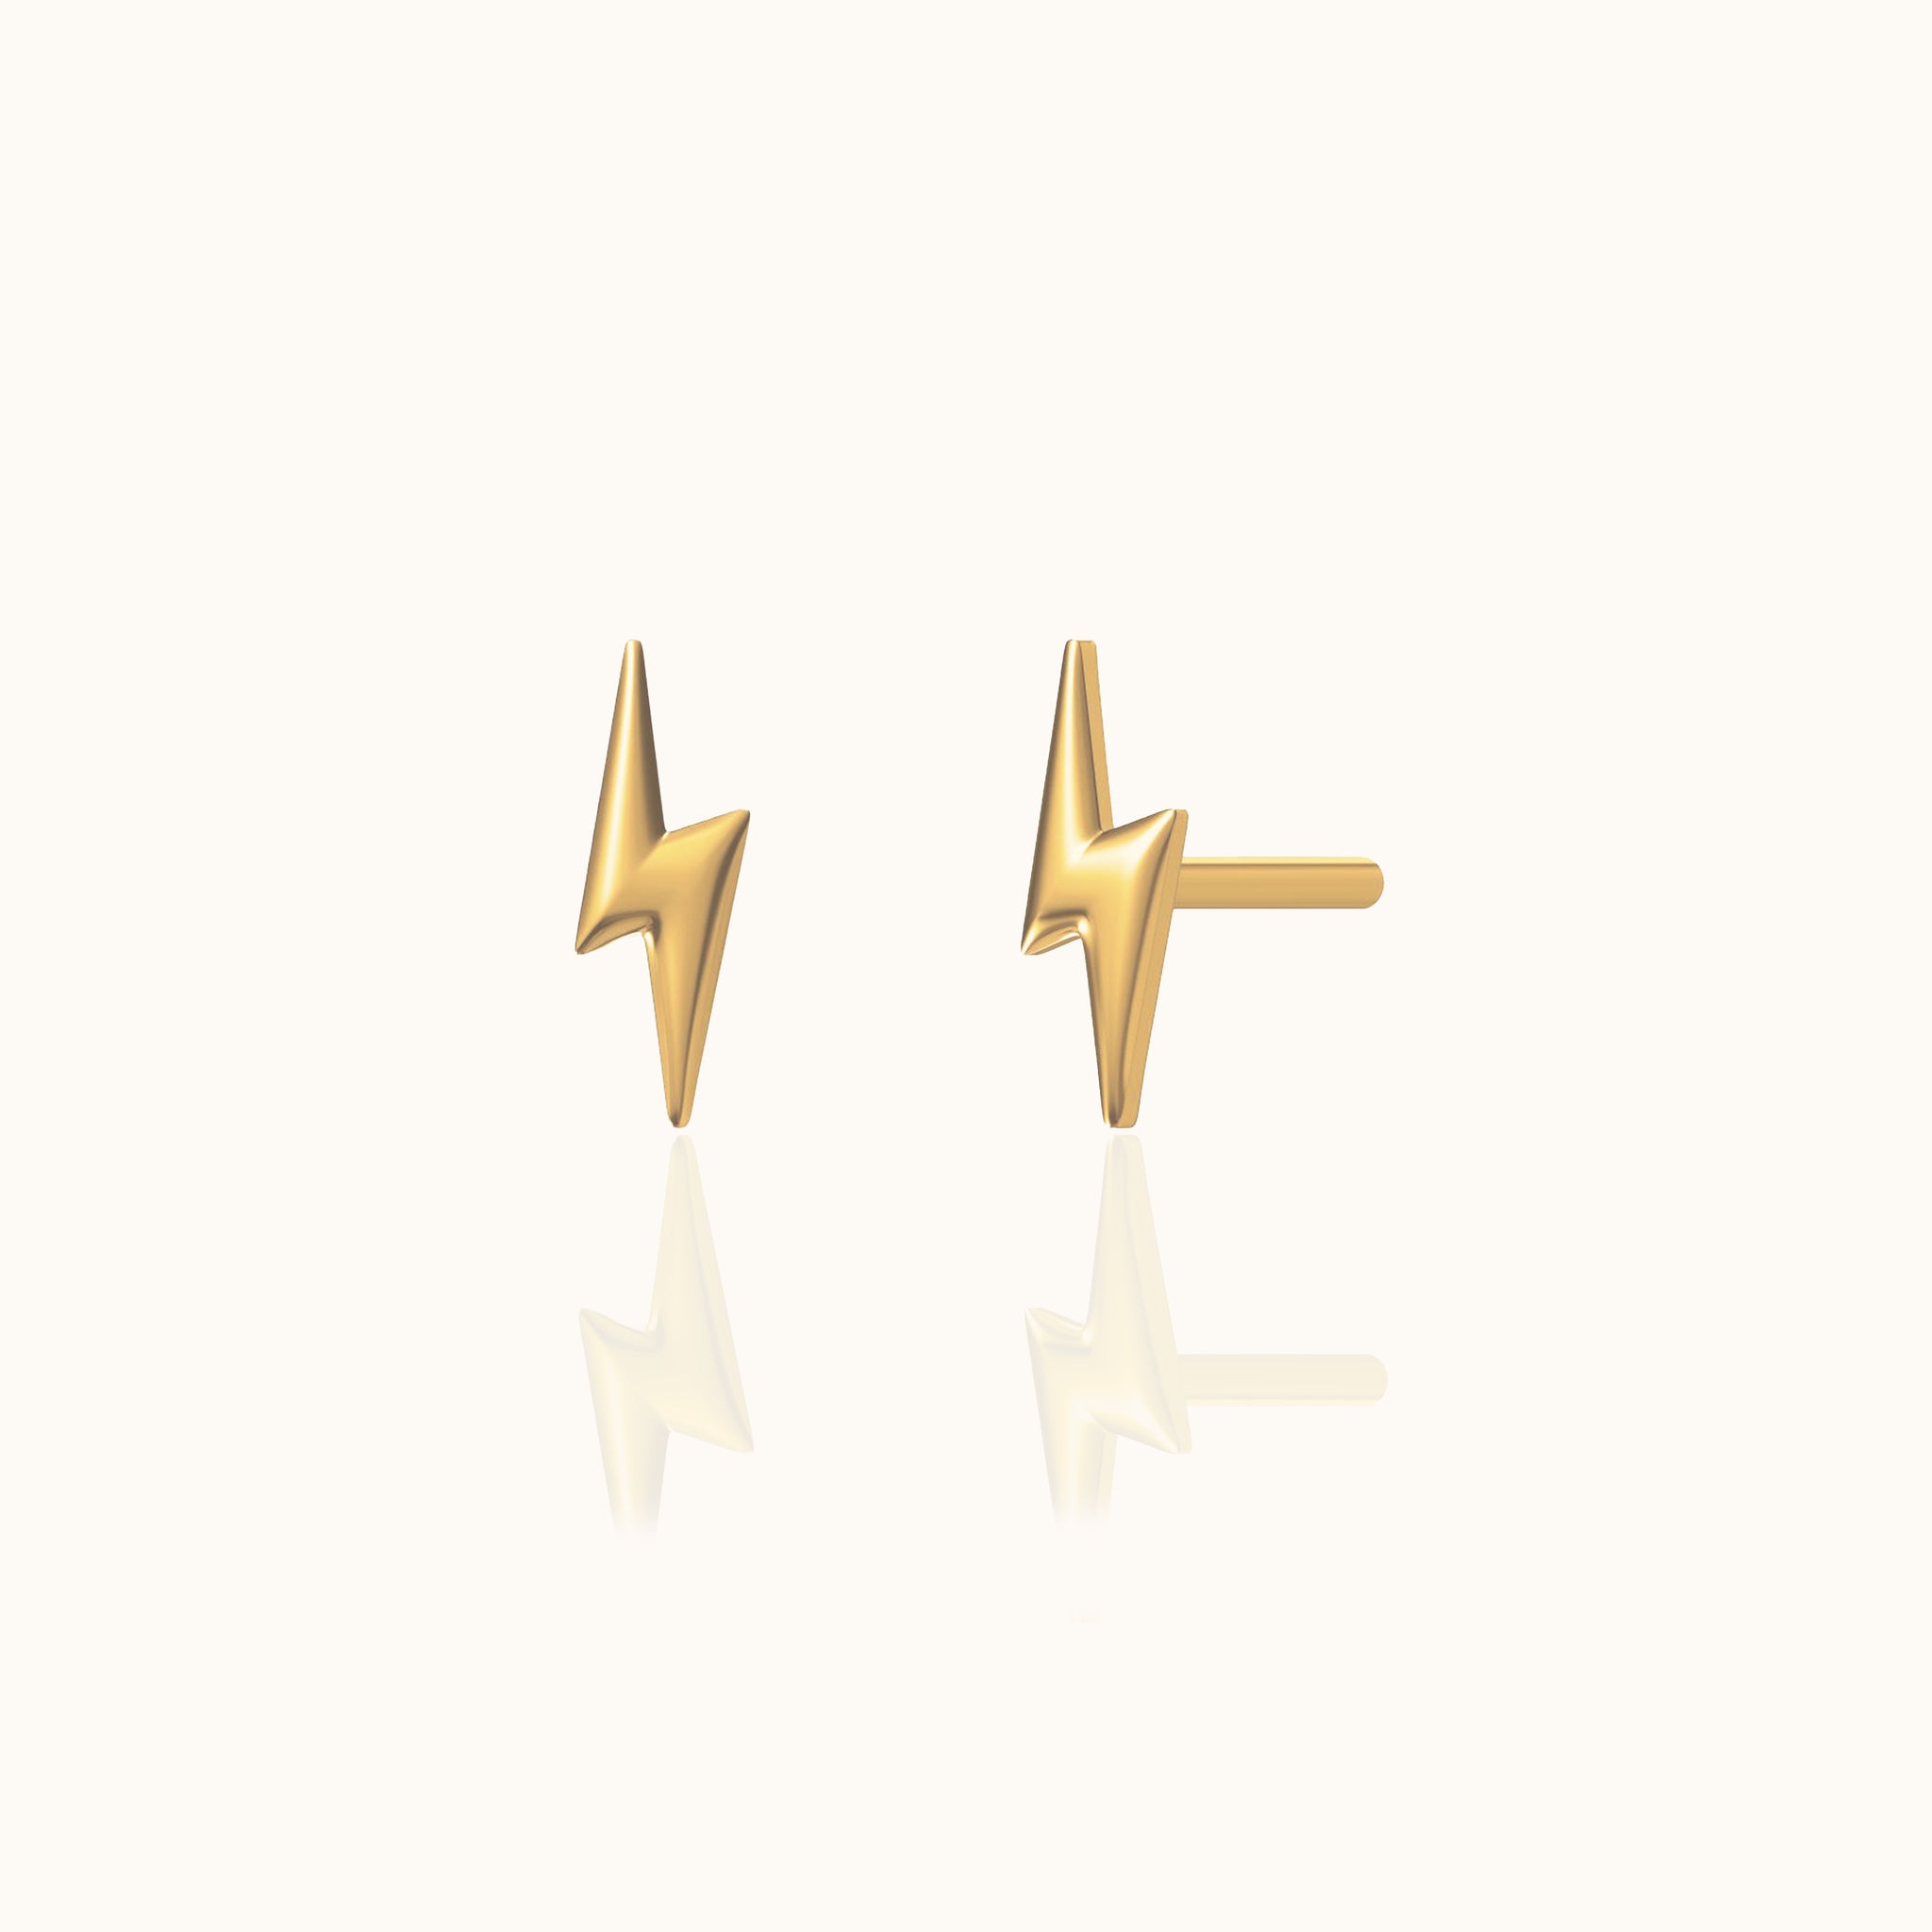 Gold Tiny Lightning Bolt Stud Earrings Prism Charm Small Studs Cartilage Tragus by Doviana